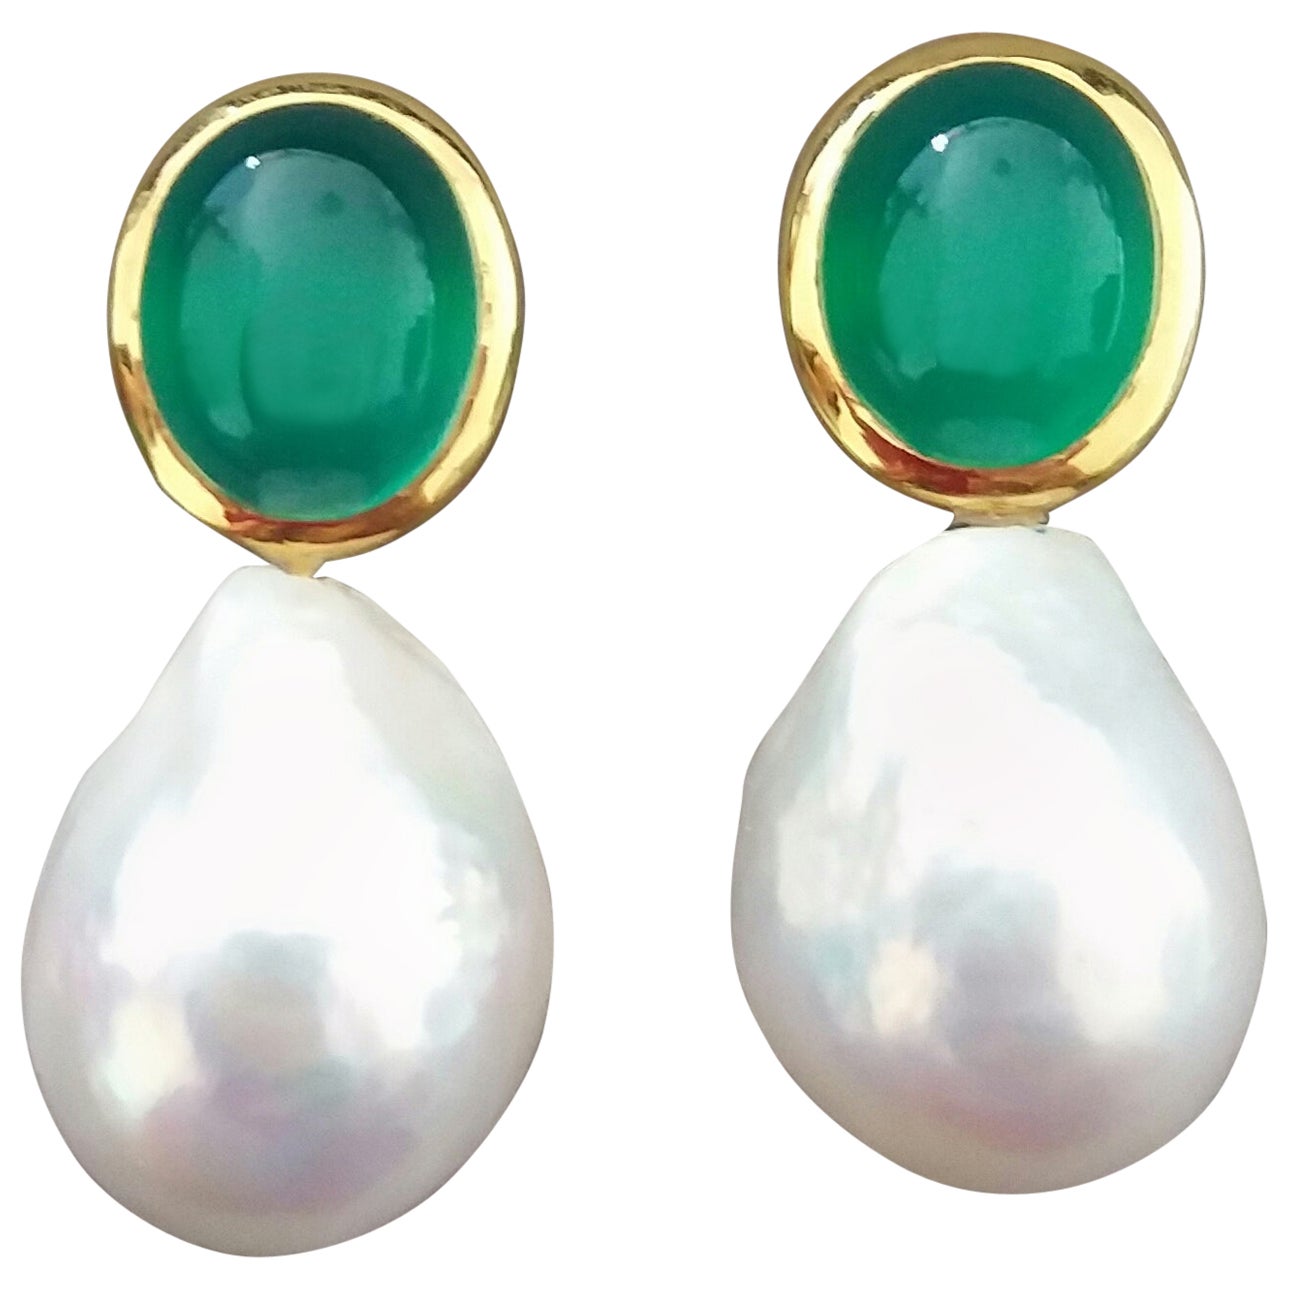 Oval Shape Green Onyx Cabs 14 Kt Yellow Gold Bezel Baroque Pearls Stud Earrings For Sale